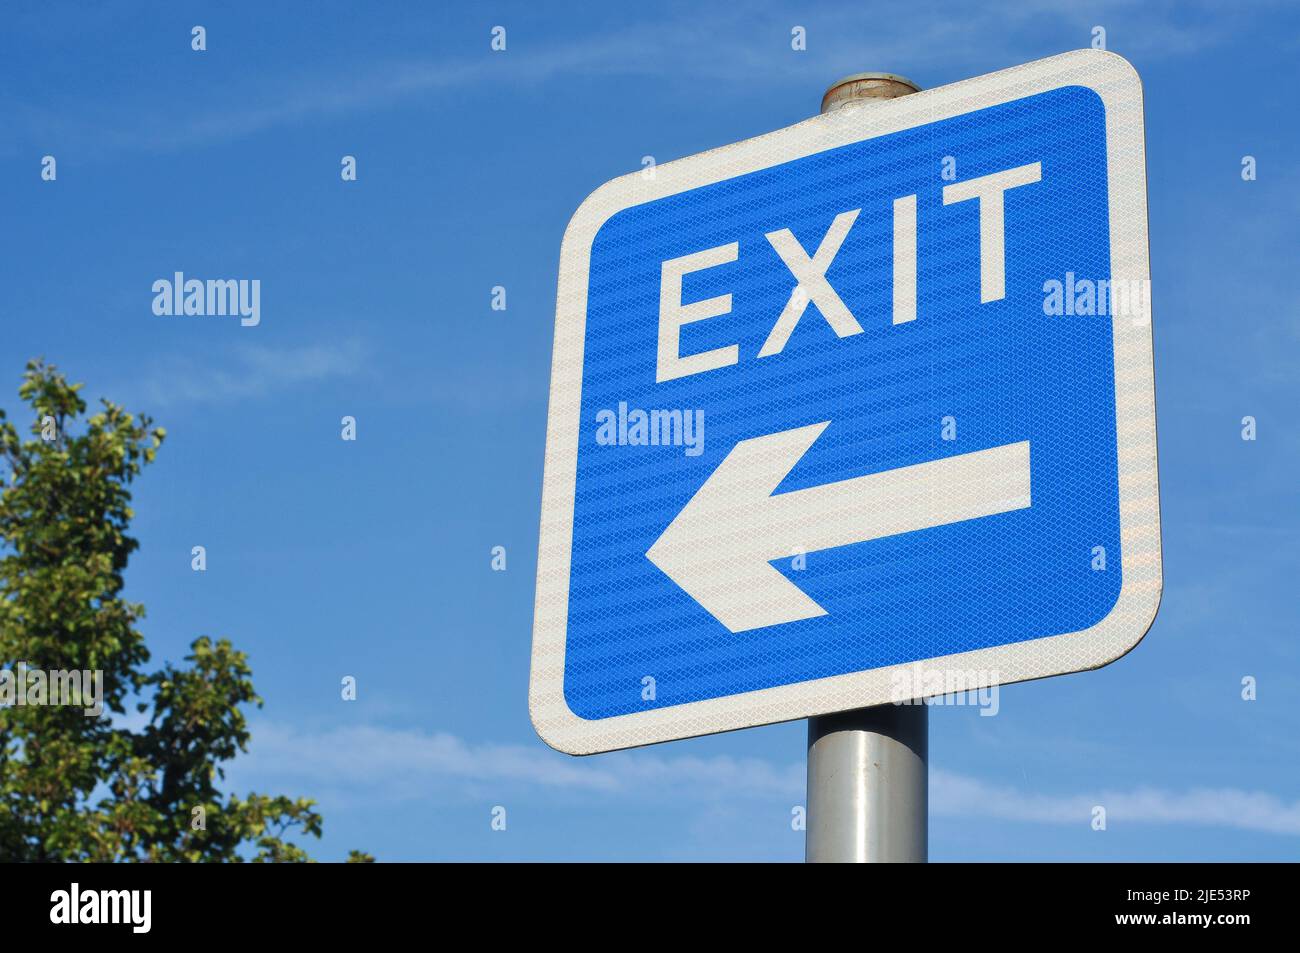 Low angle view of blue and white EXIT road sign with directional arrow symbol pointing to the left hand side, against a bright blue sky background. Stock Photo